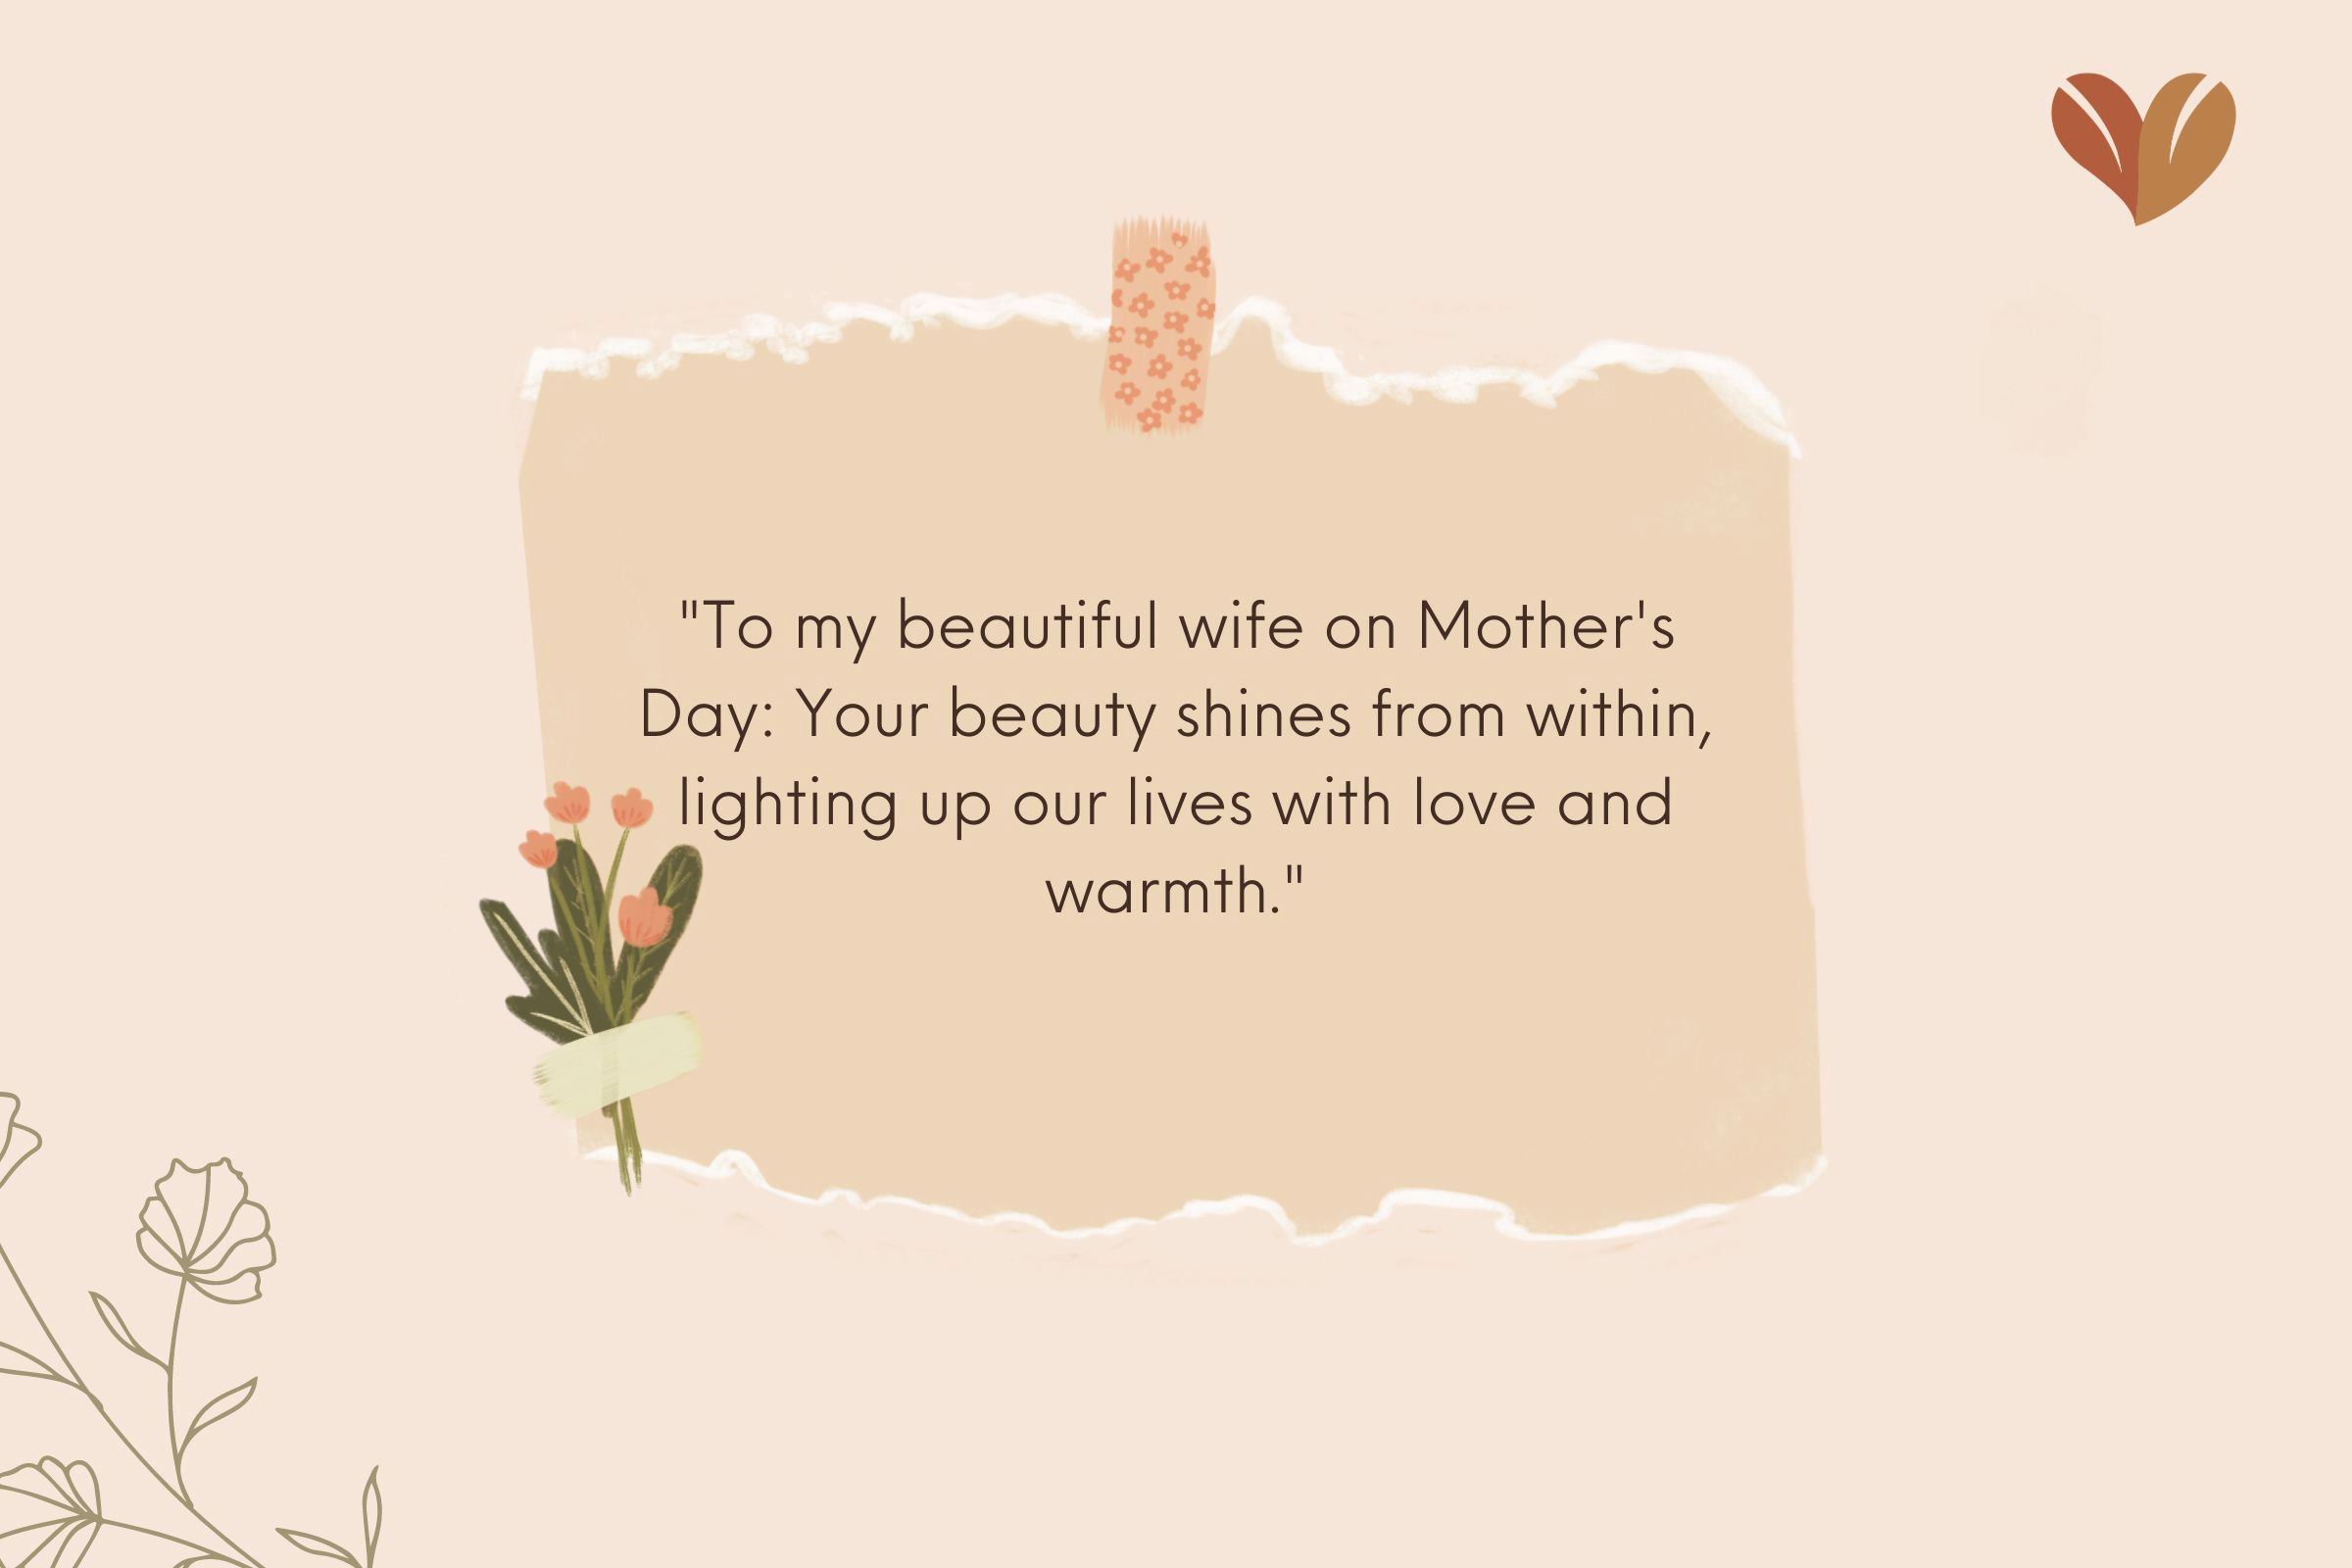 Happy mothers day quotes for my wife - To the woman whose beauty knows no bounds, Happy Mother's Day, my darling wife. You are the embodiment of grace